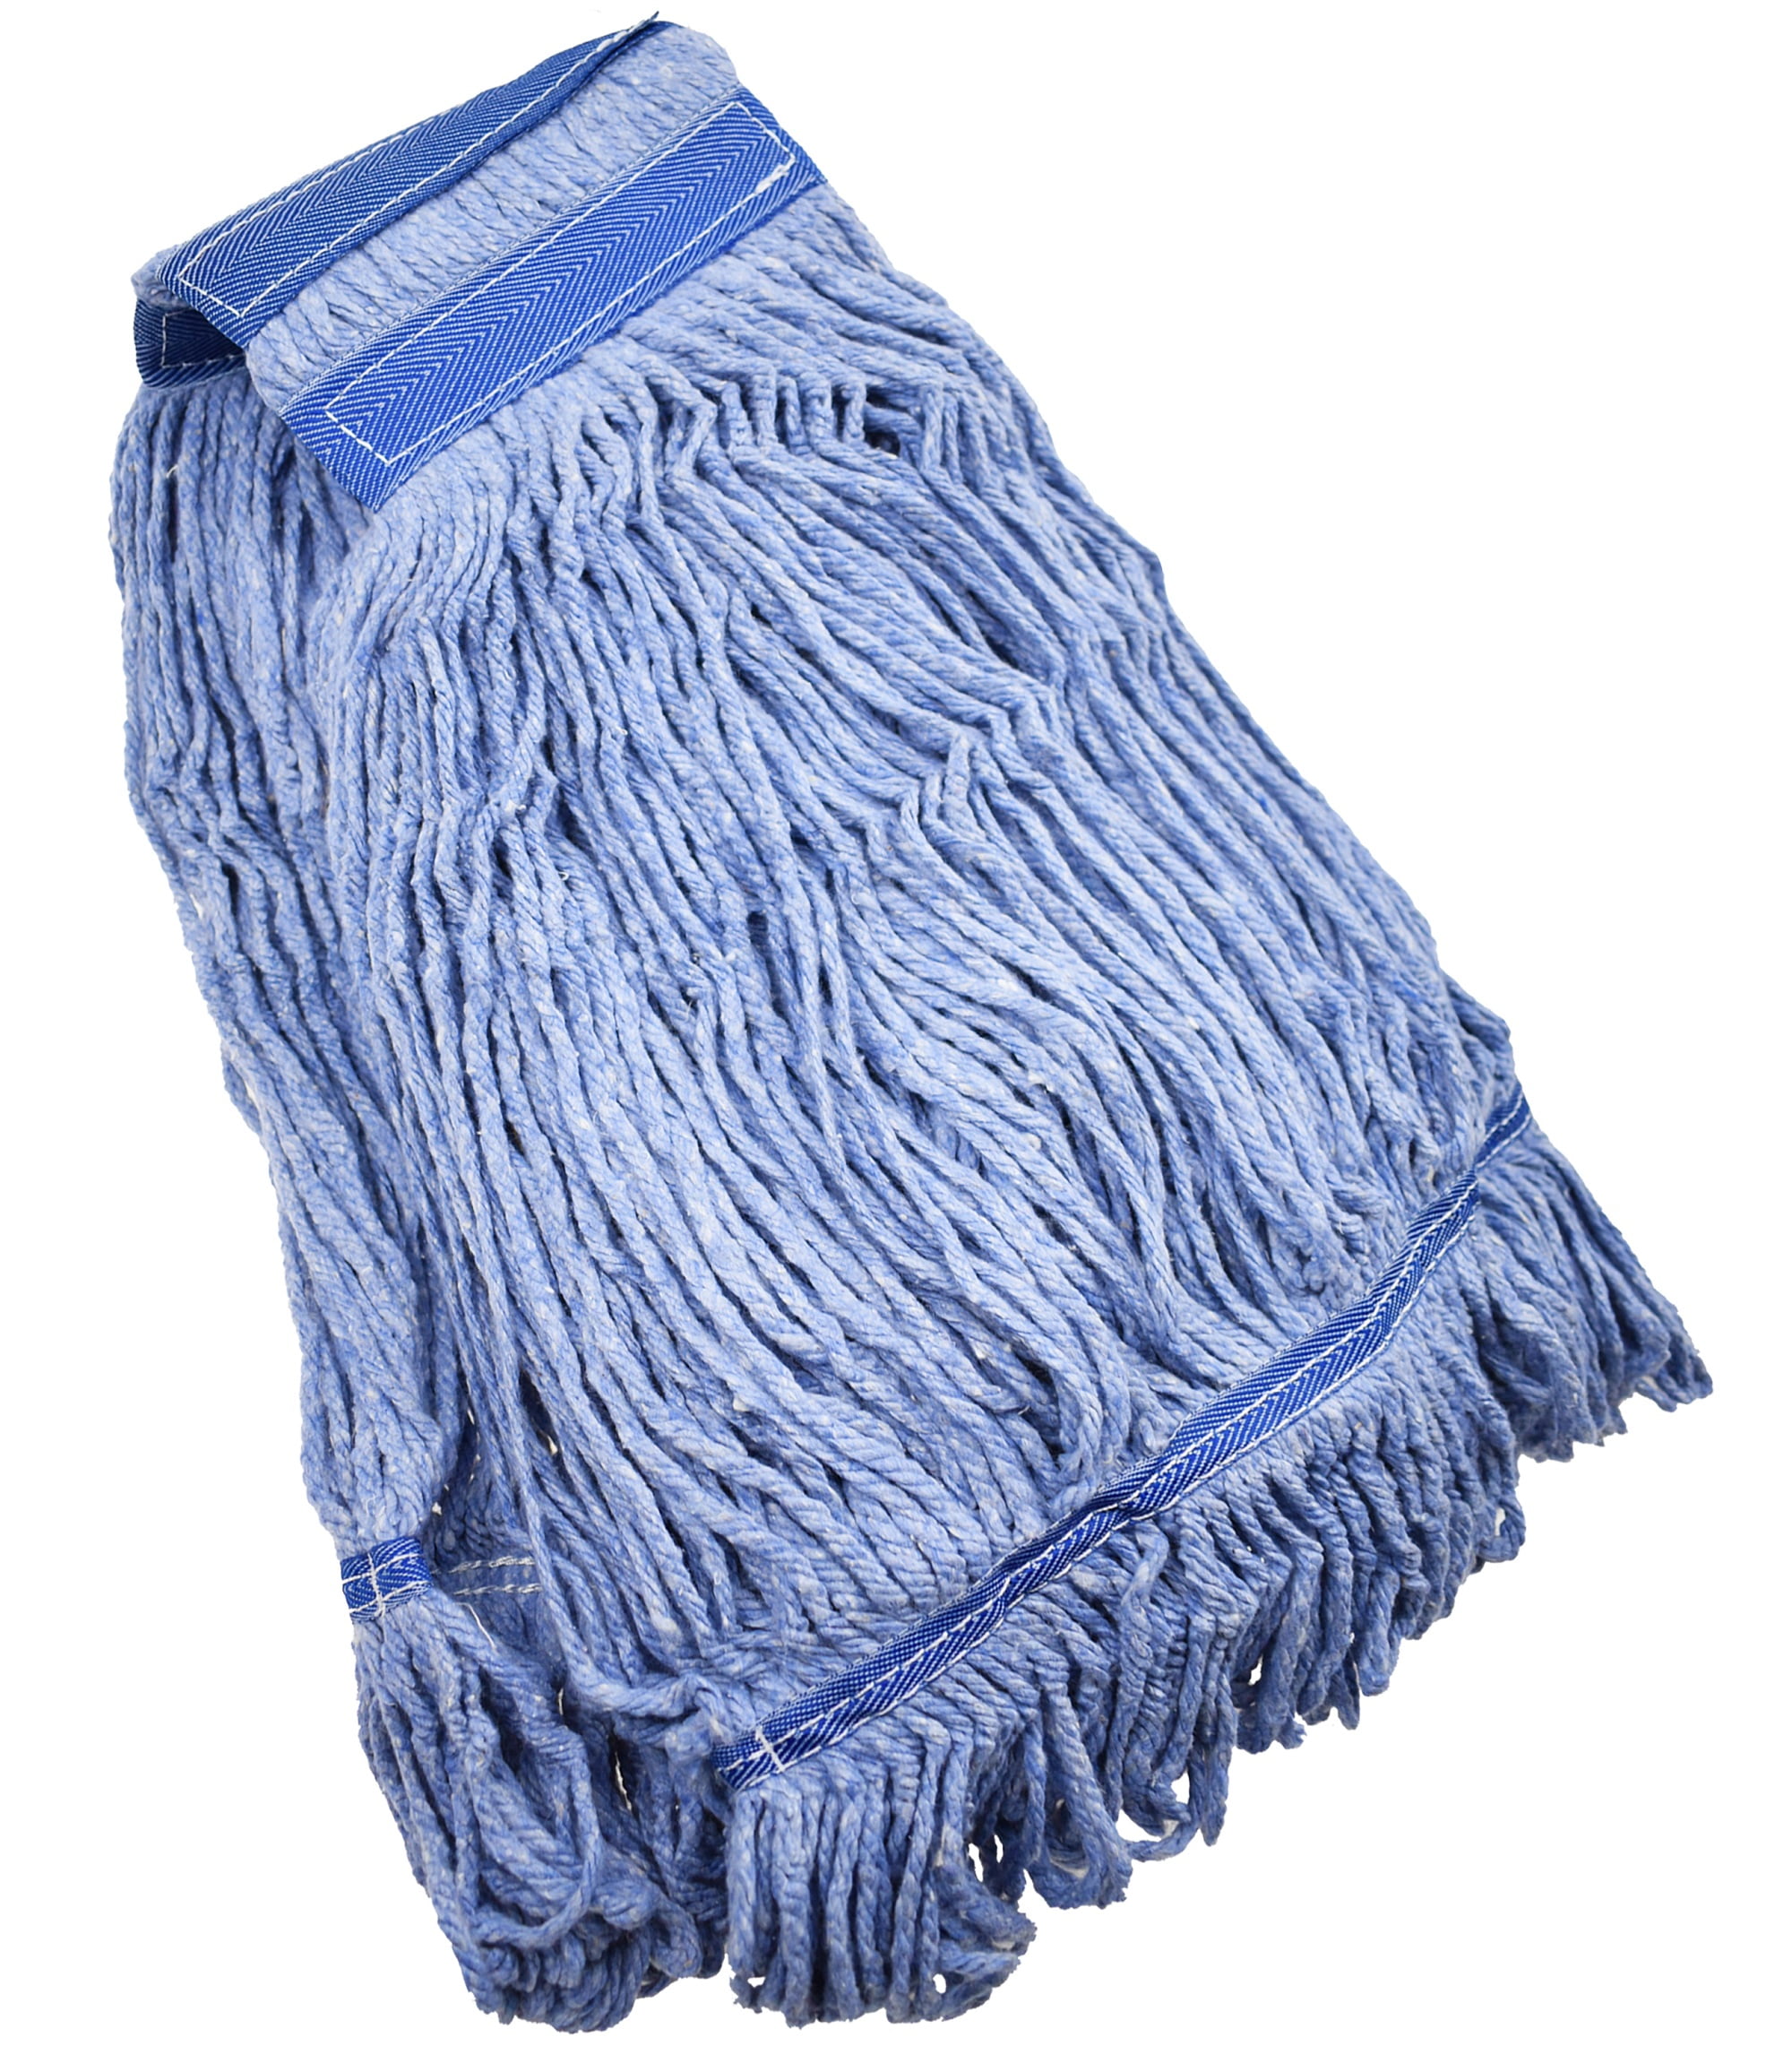 57 in. Blue Microfiber Wet String Mop with An Extra Mop Head